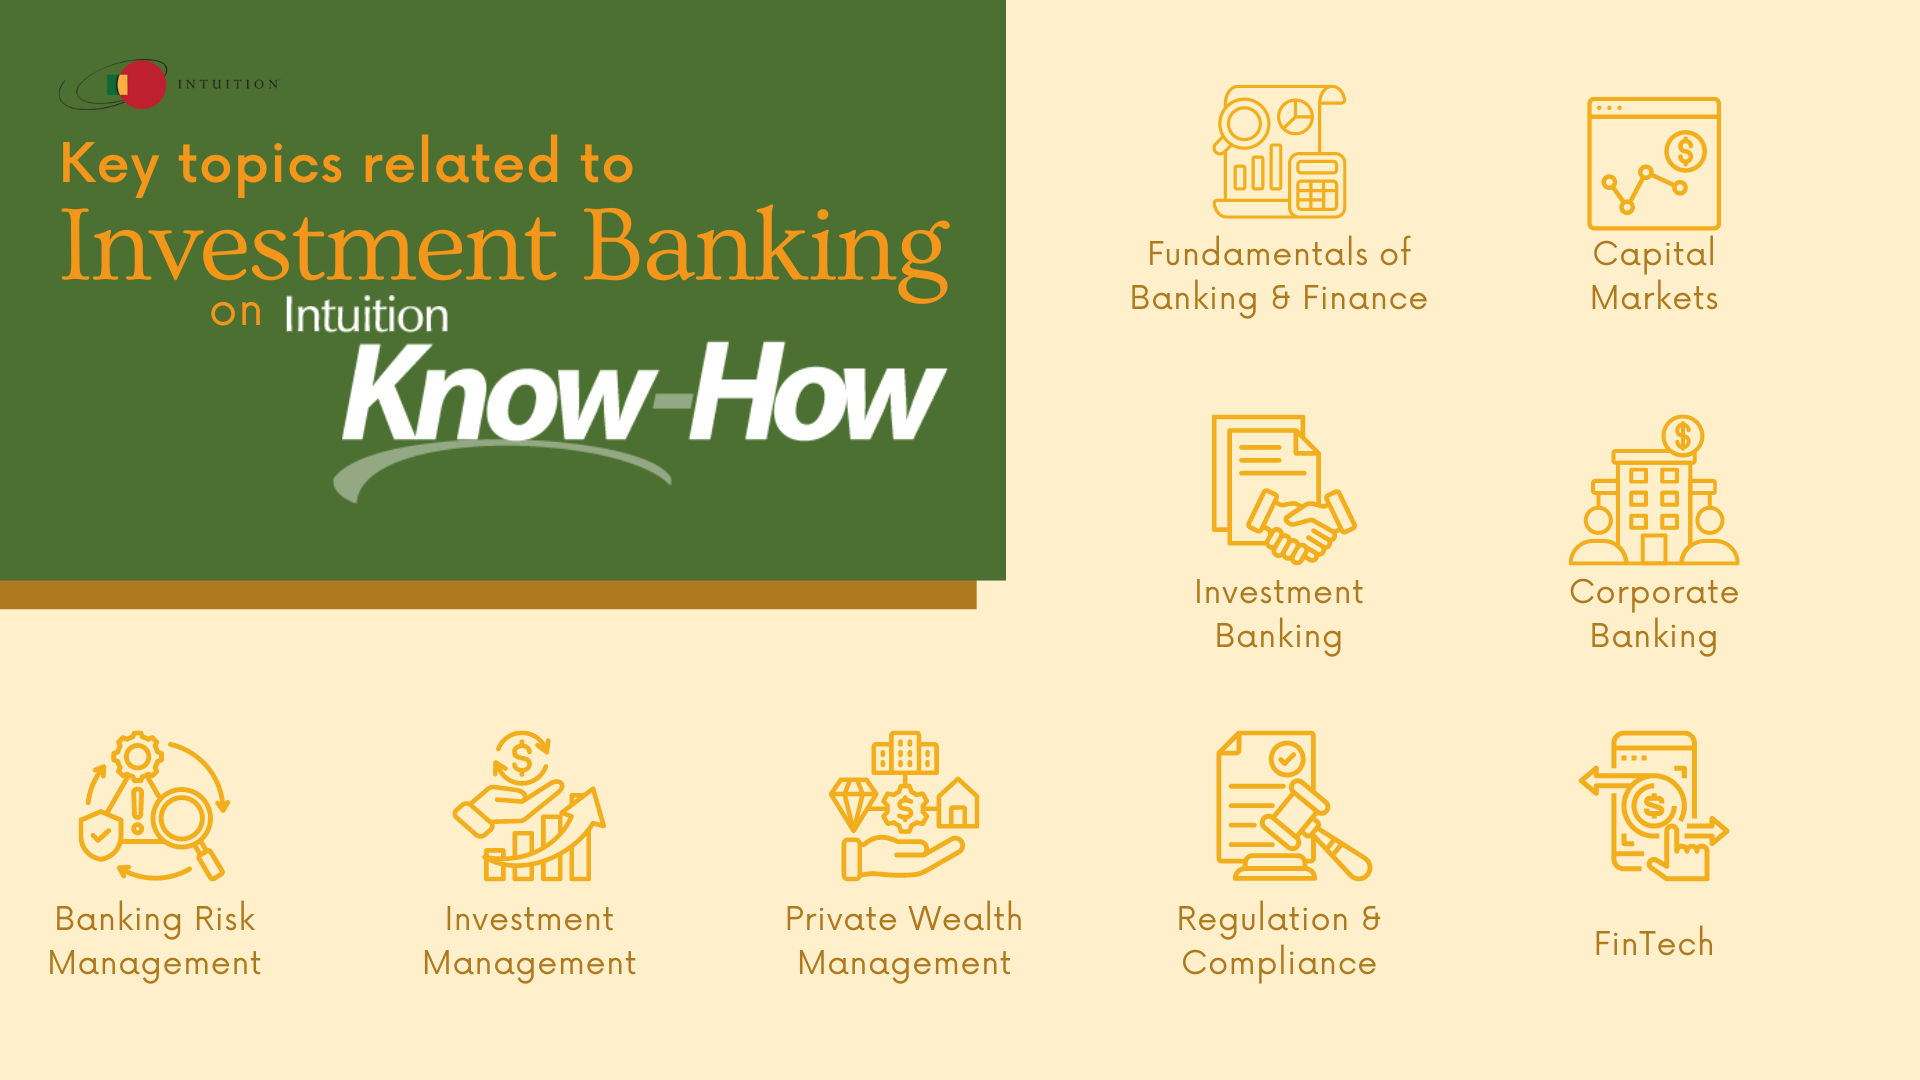 Know-How investment banking